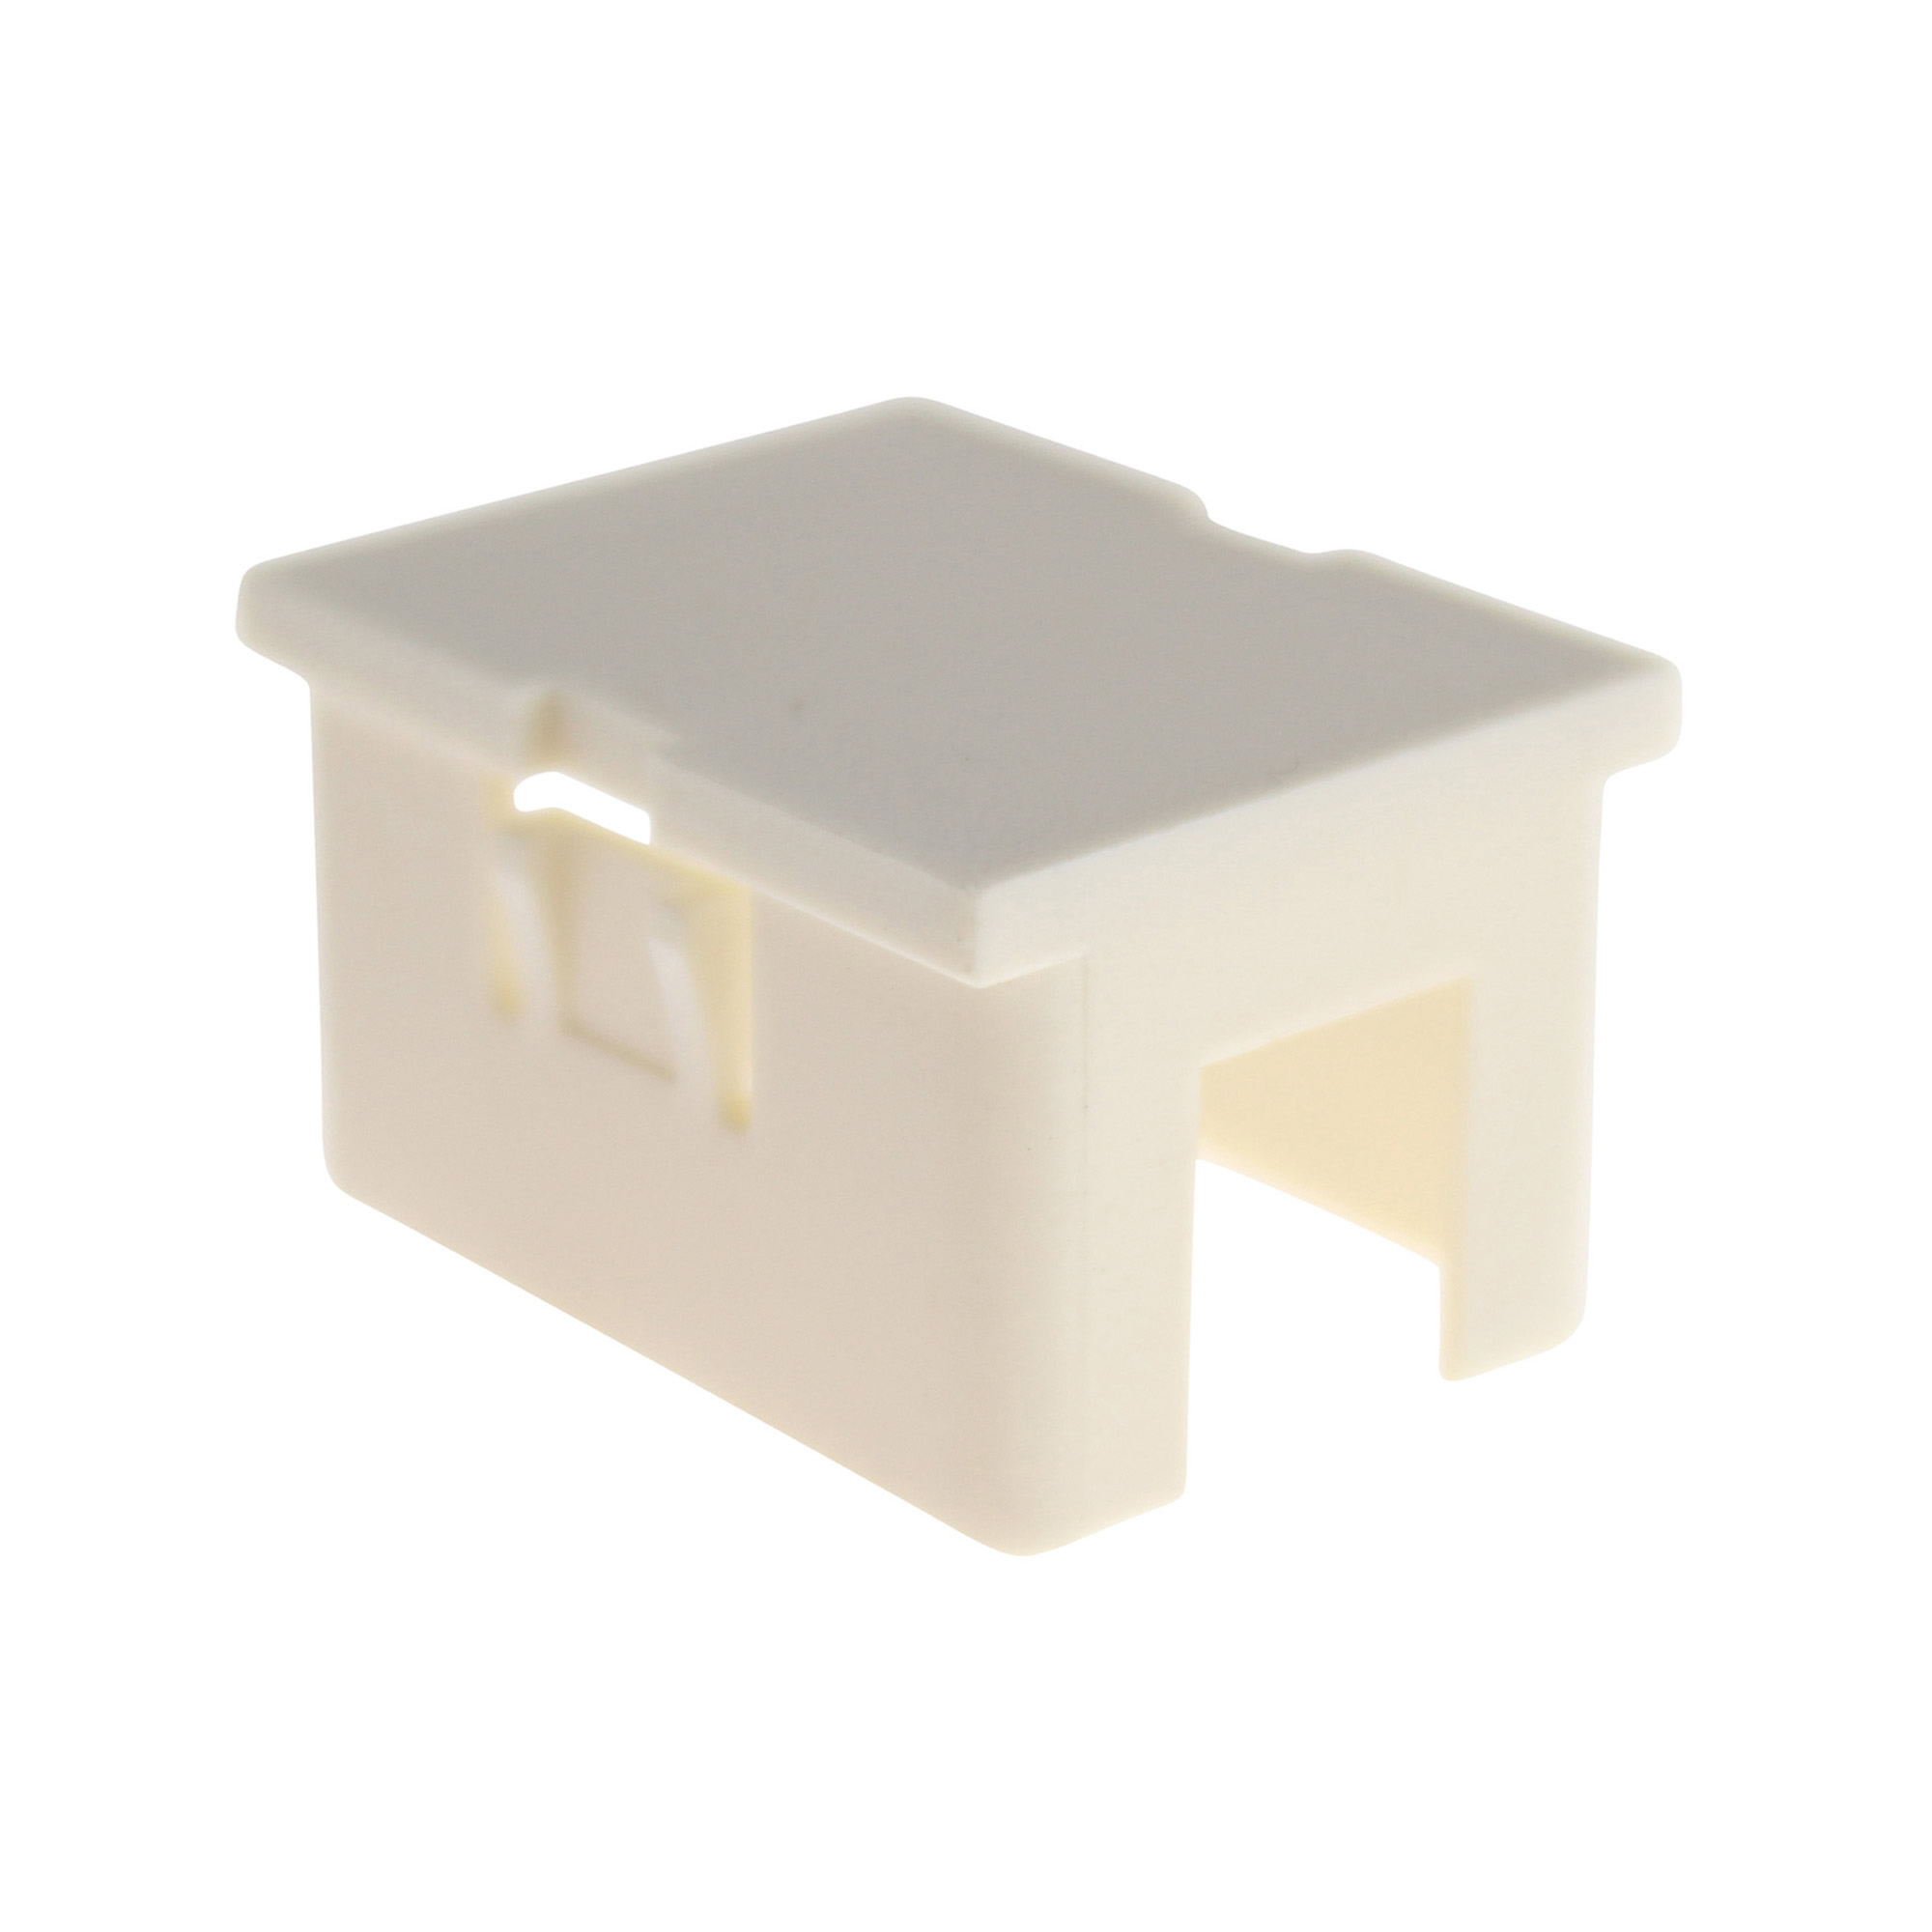 Pass & Seymour Legrand PSBL10-OW Blank Keystone Insert, Off White (10 Pack) - image 2 of 3